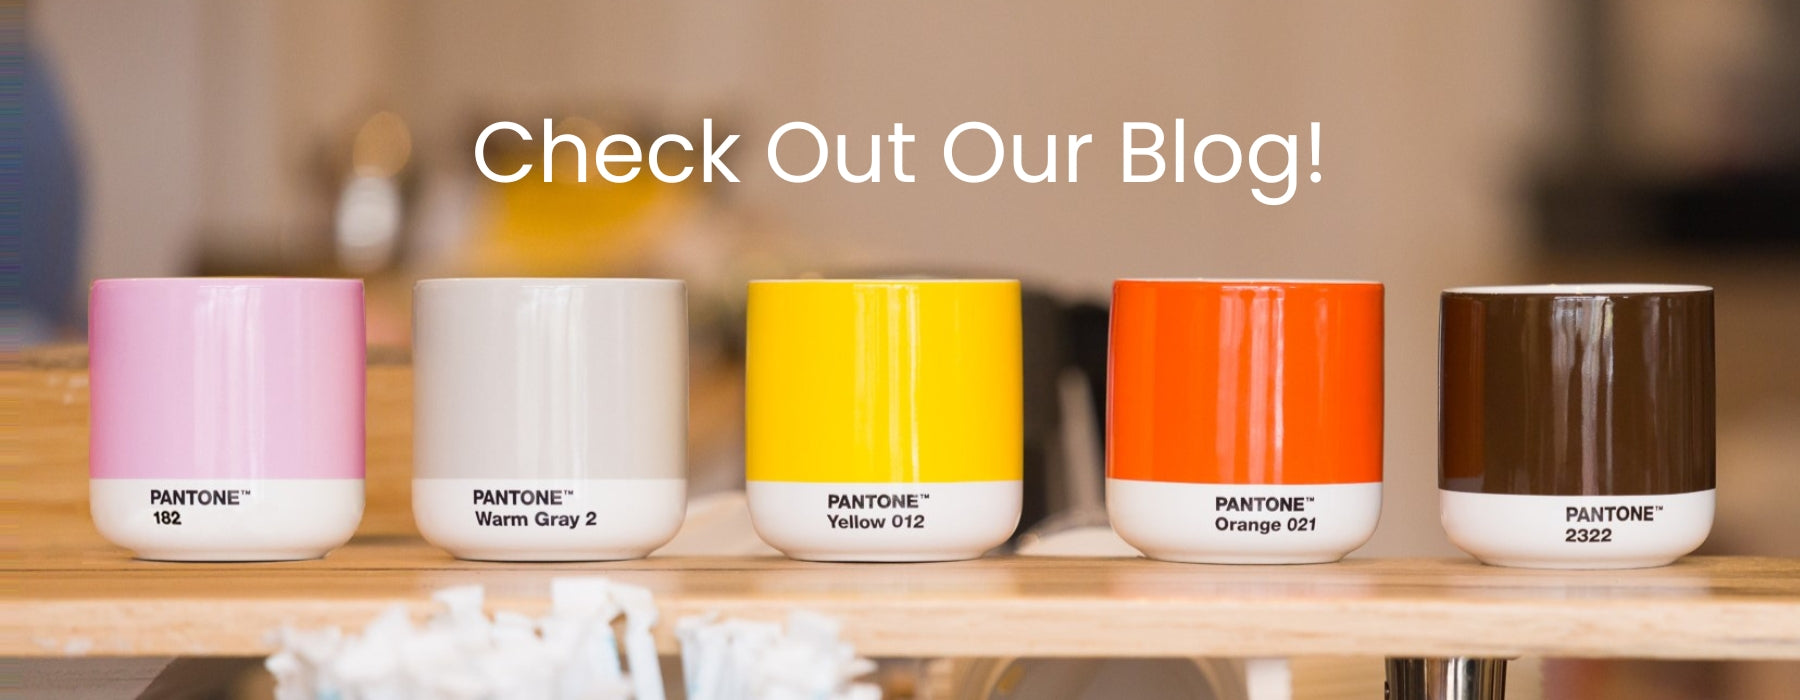 photo of Pantone cortado cups in pink, gray, yellow, orange and brown.